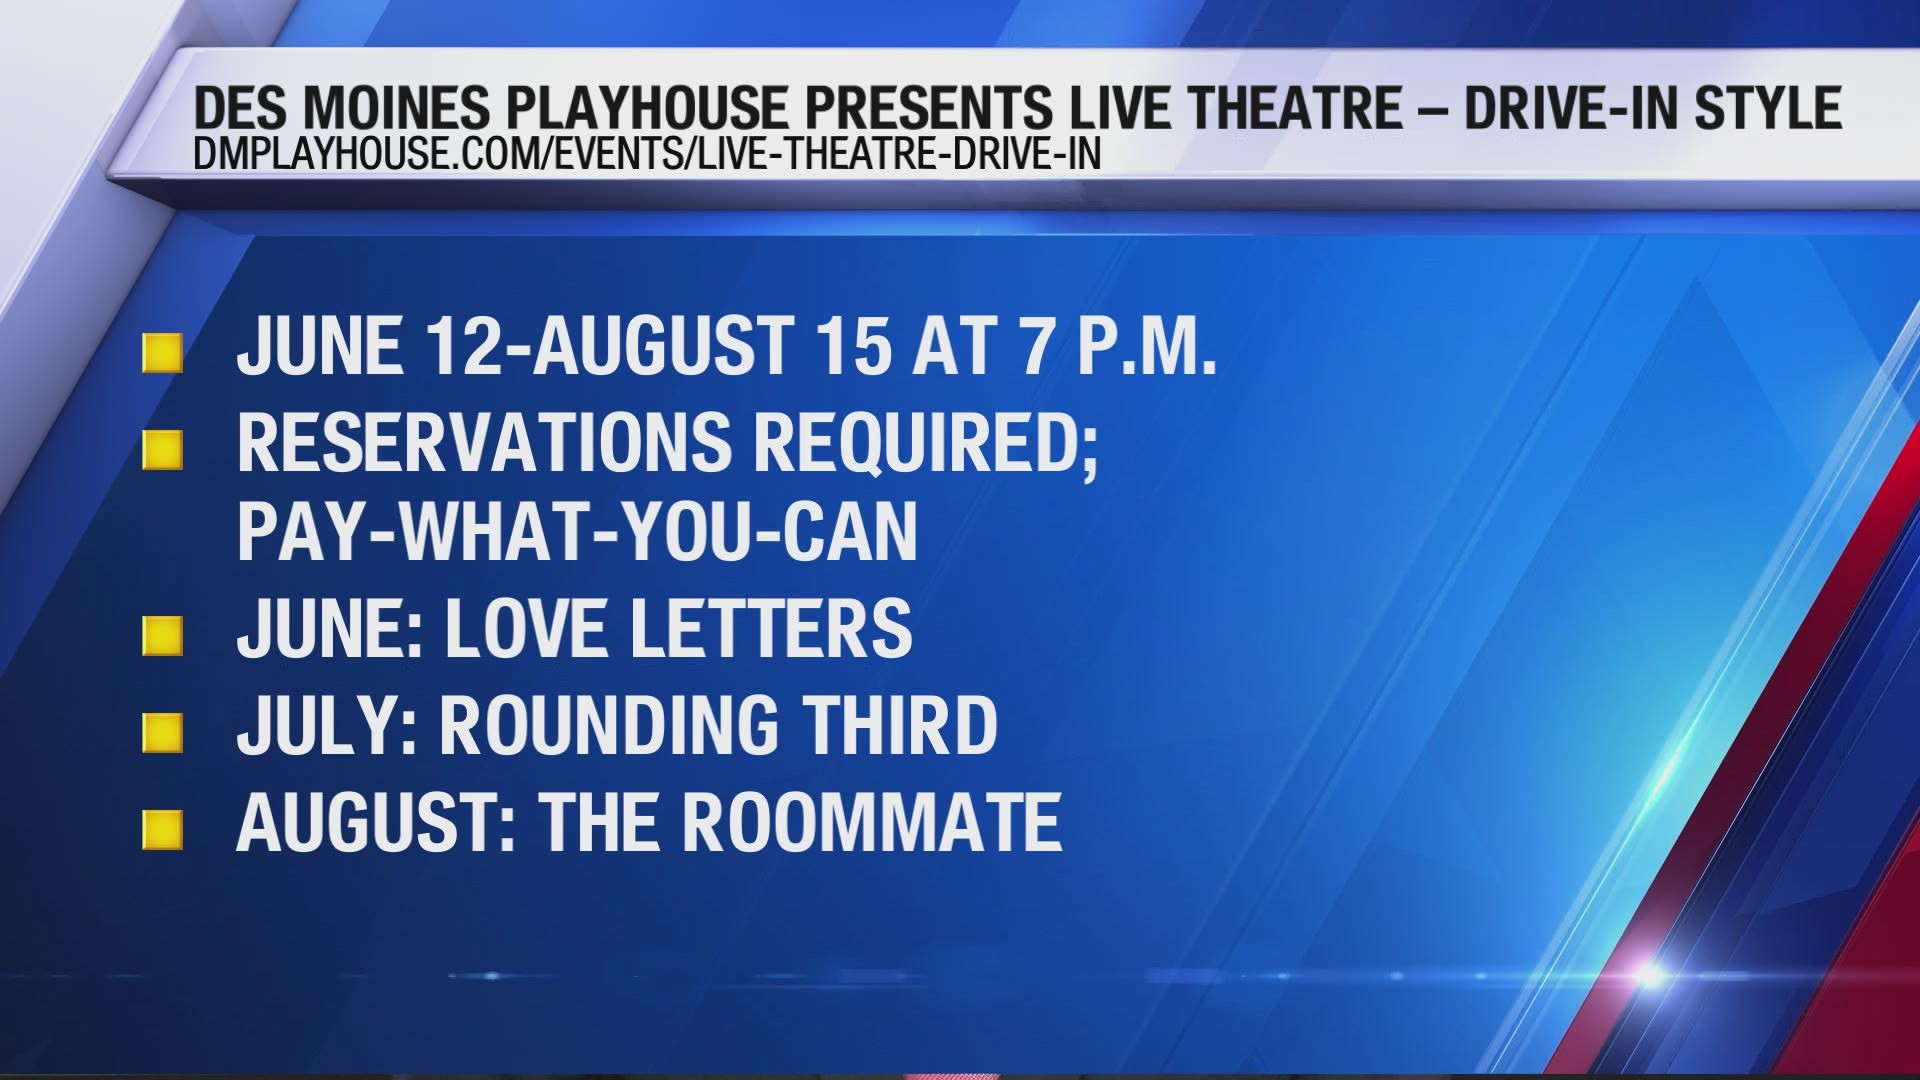 The Des Moines Playhouse is presenting a Live Theatre Drive-in experience to keep theatre live in Des Moines.